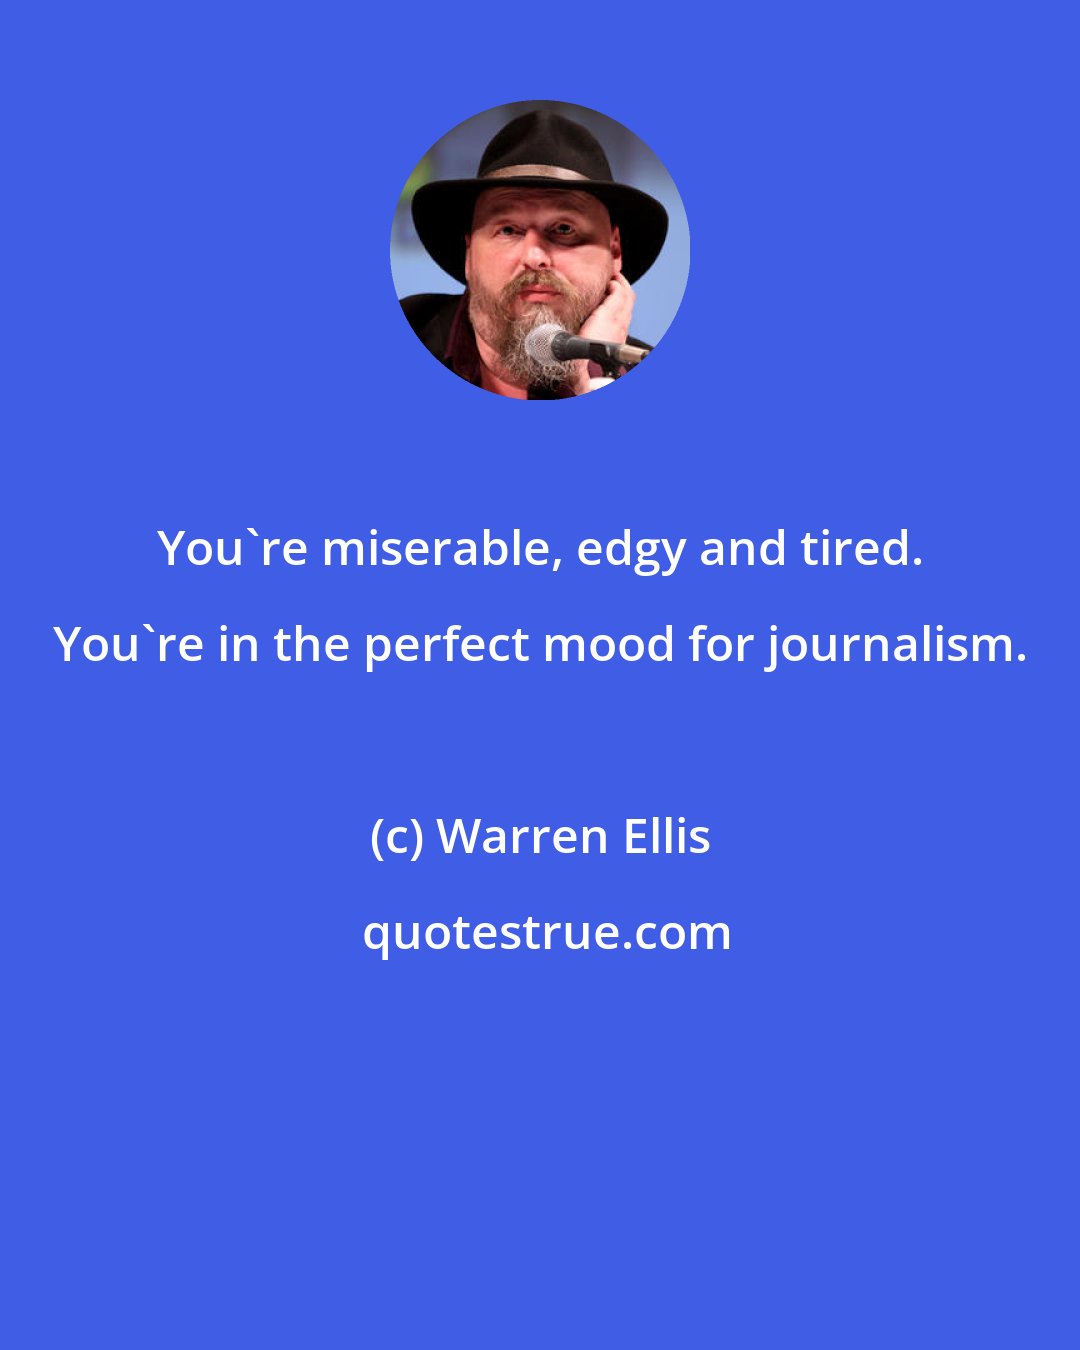 Warren Ellis: You're miserable, edgy and tired. You're in the perfect mood for journalism.